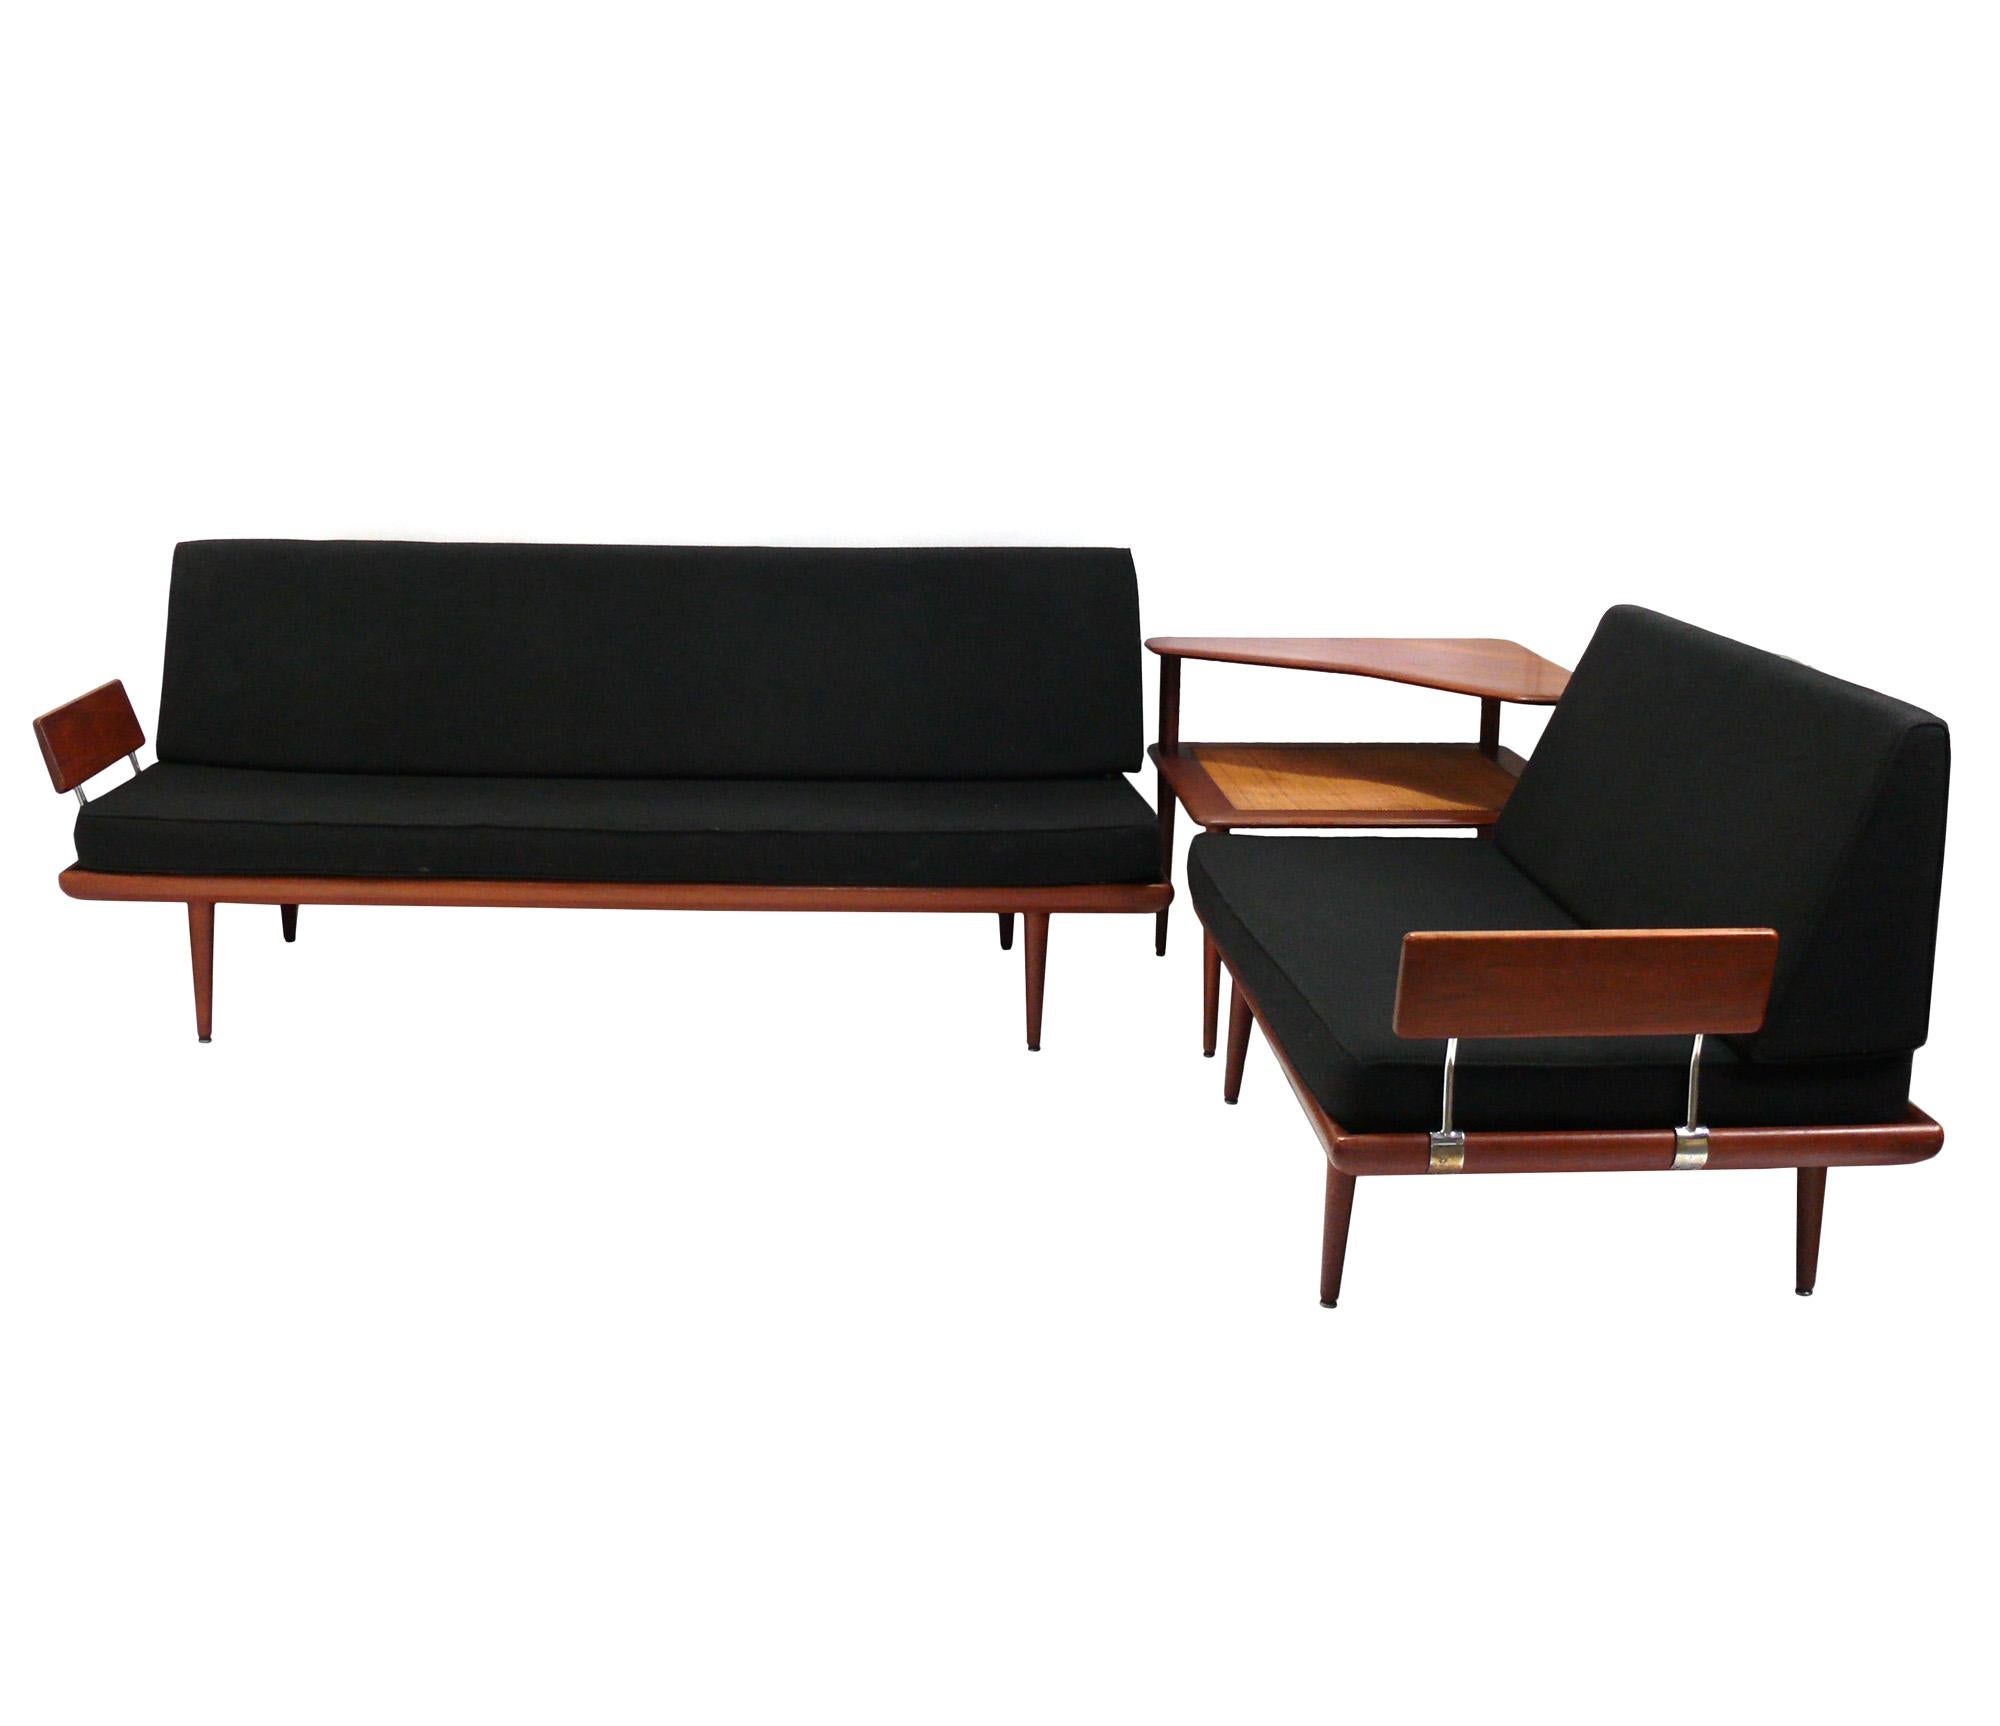 Mid-20th Century Danish Modern Modular Sofa by Peter Hvidt For Sale